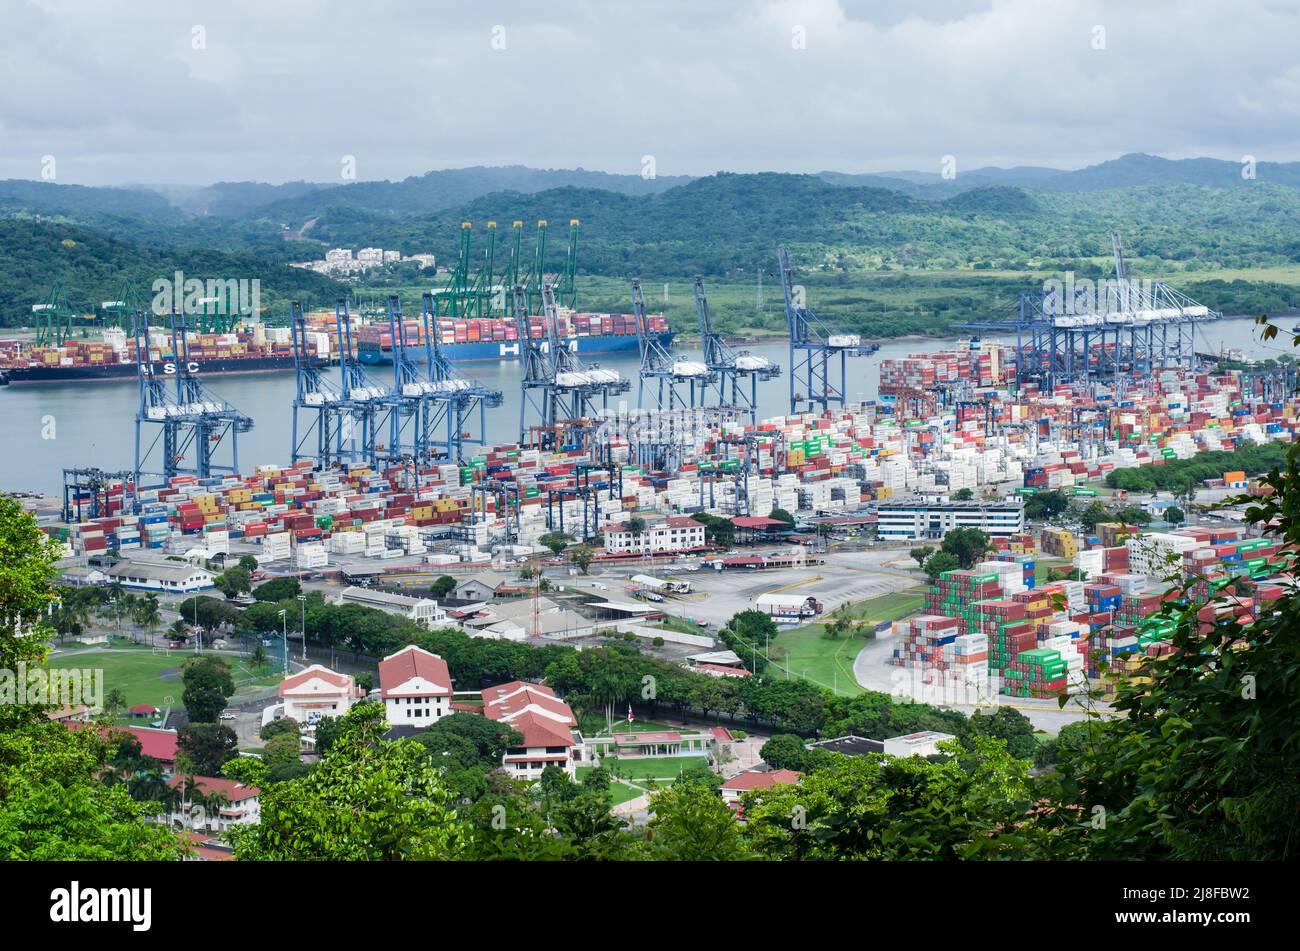 Panama Ports Company containers and Panama Canal Pacific Entrance as seen in the distance from the Ancon Hill Stock Photo